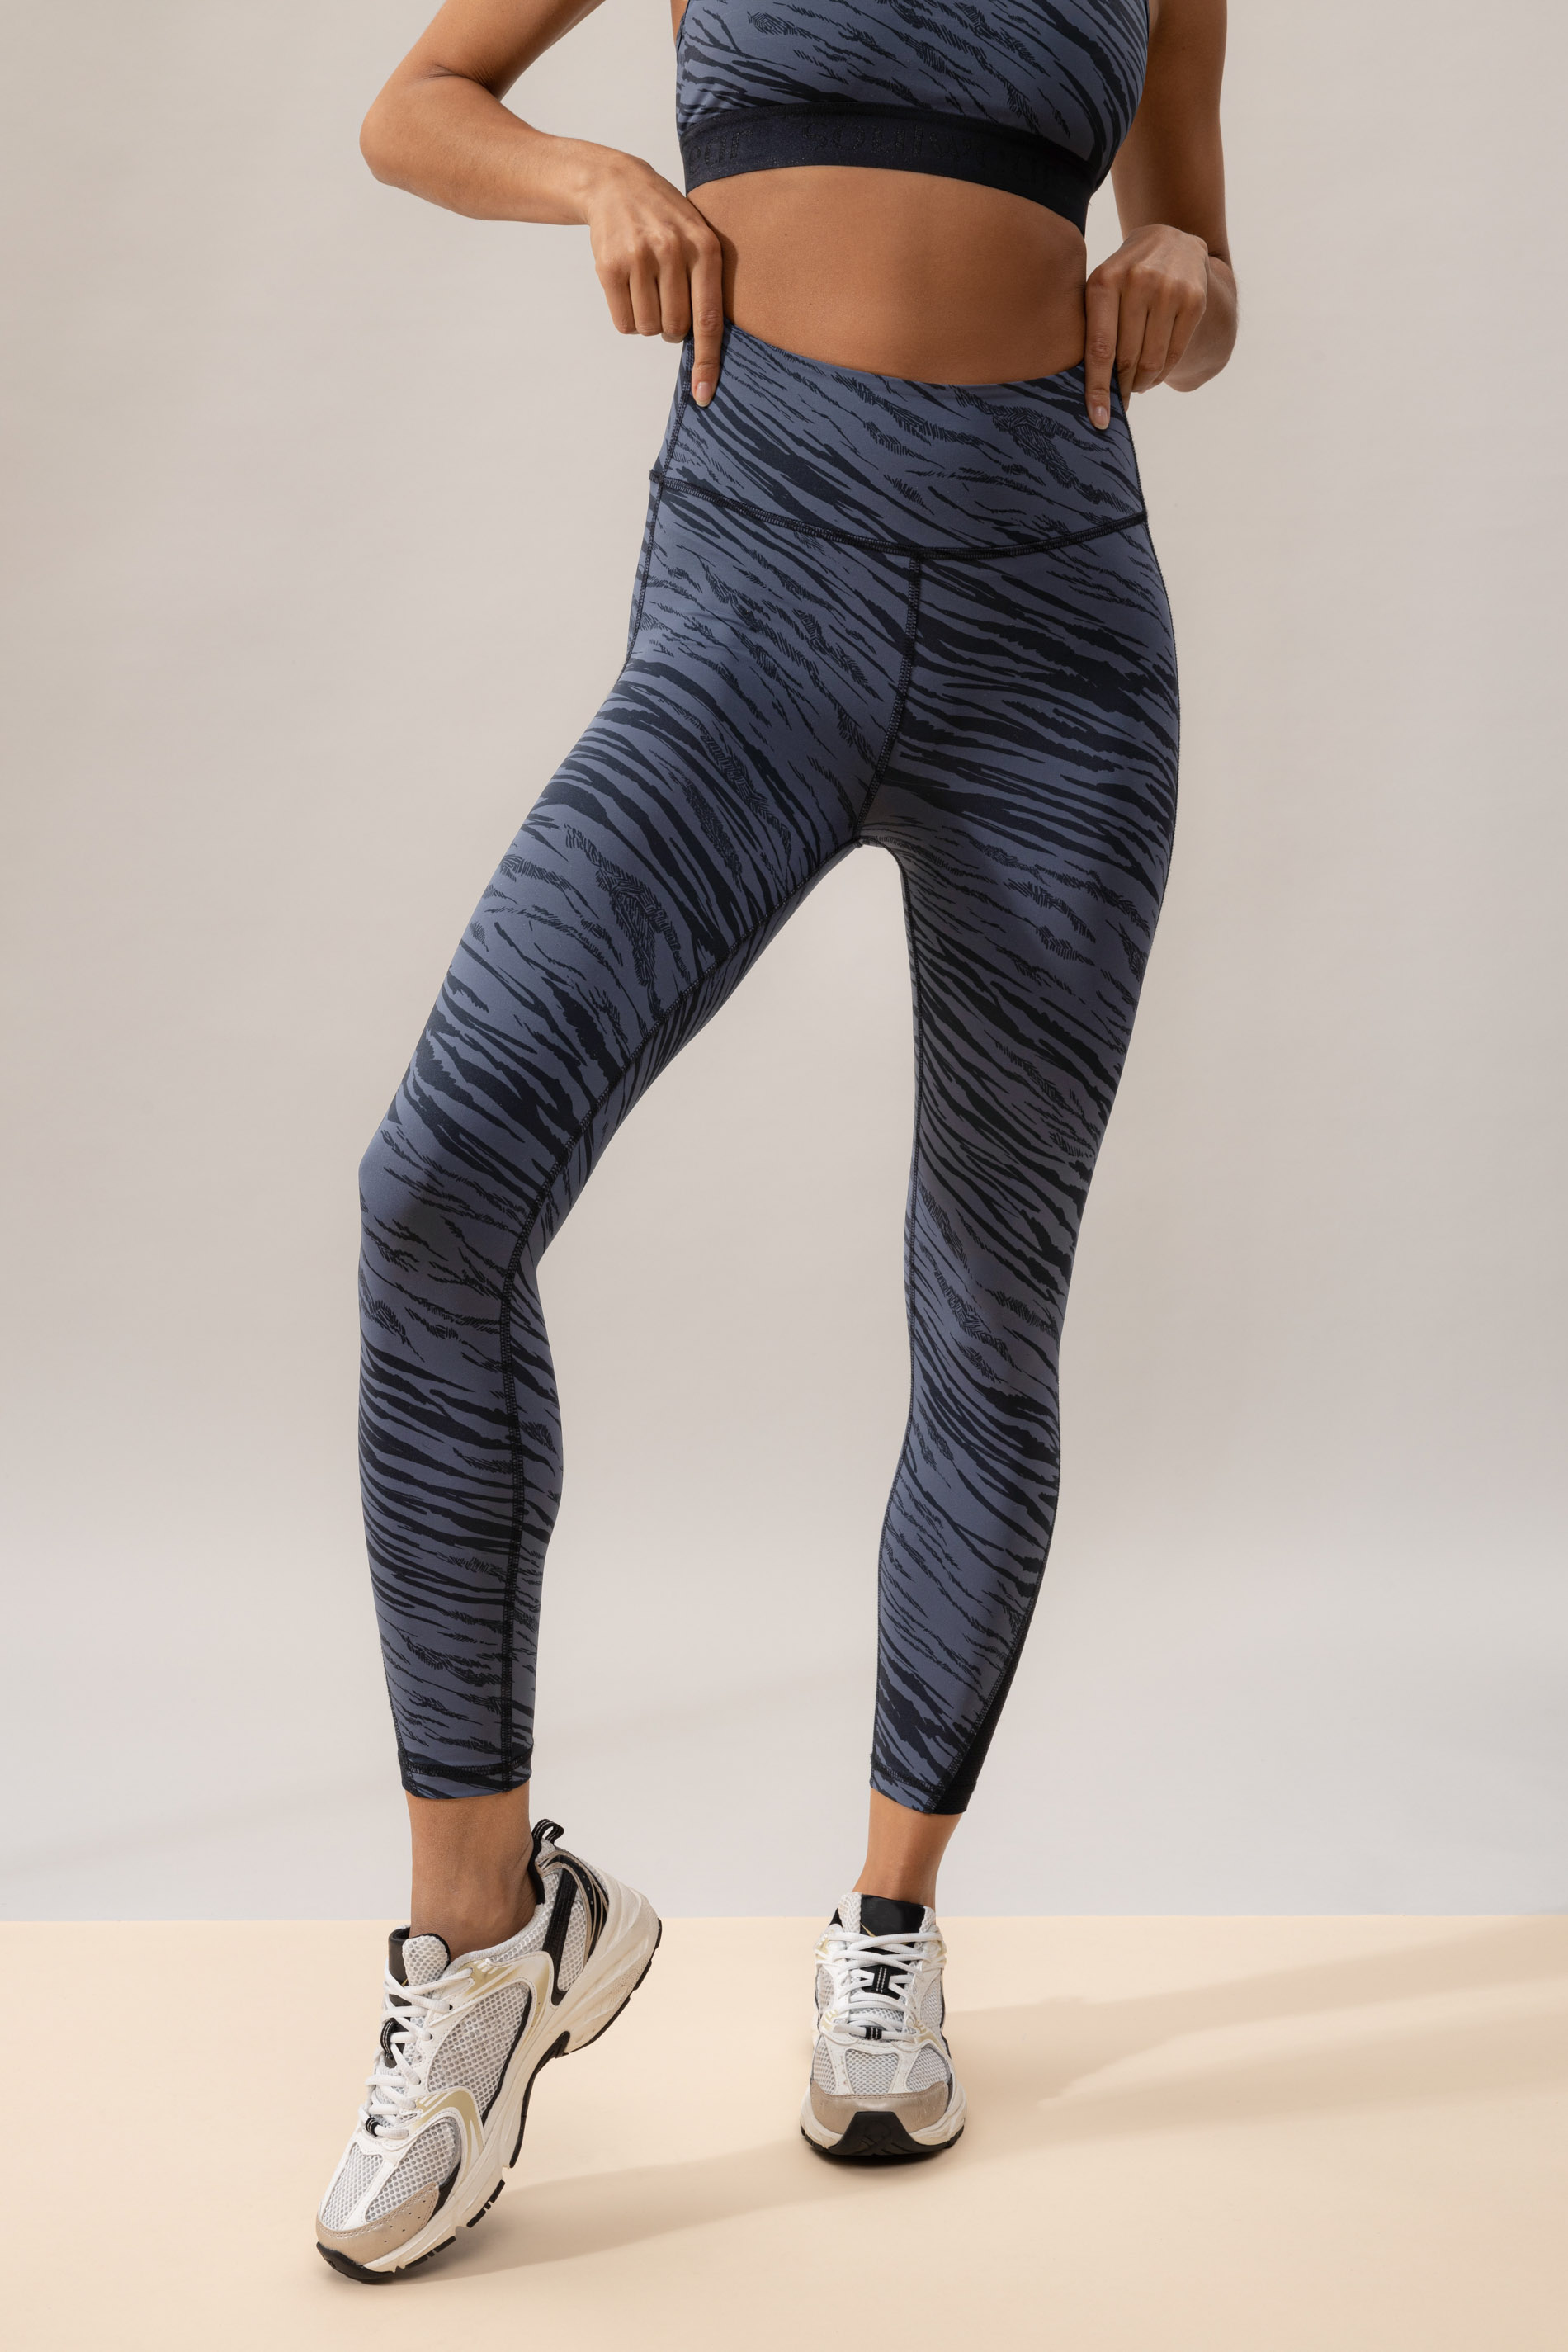 Legging lang Carbon Serie Stretchable Vooraanzicht | mey®